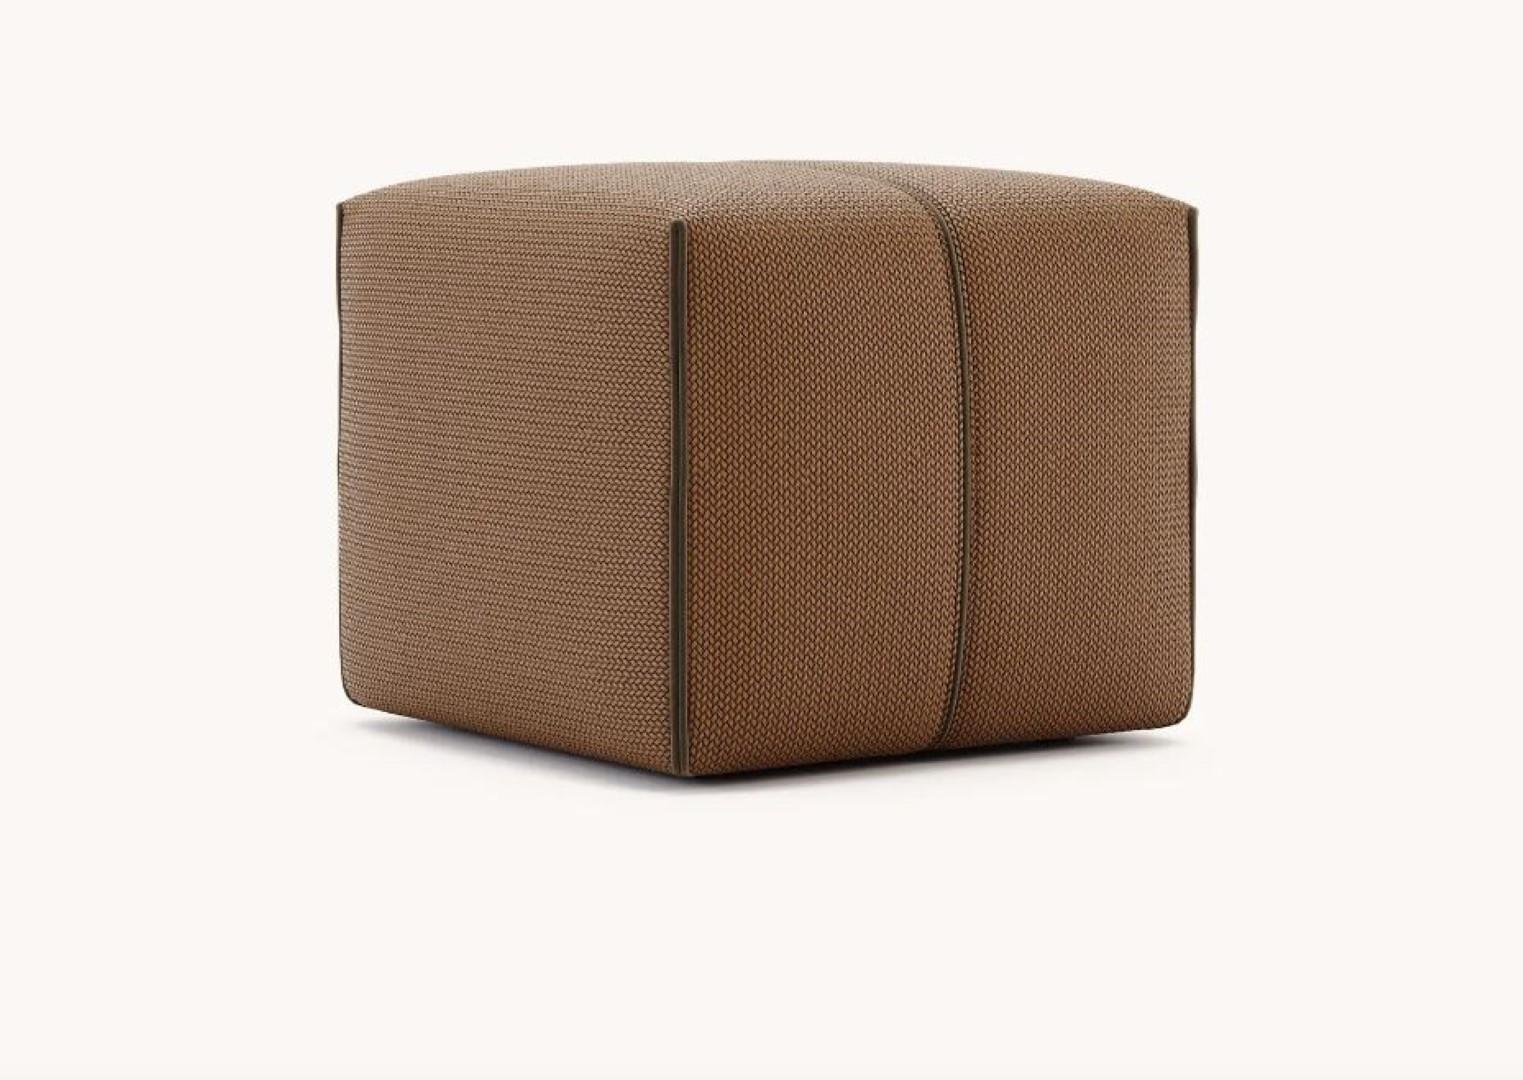 Grant S Pouf by Domkapa
Materials: velvet, synthetic leather.
Dimensions: W 45 x D 45 x H 40 cm. 
Also available in different materials. 

The construction of Grant pouf skillfully combines aesthetics and ergonomics to establish this as the